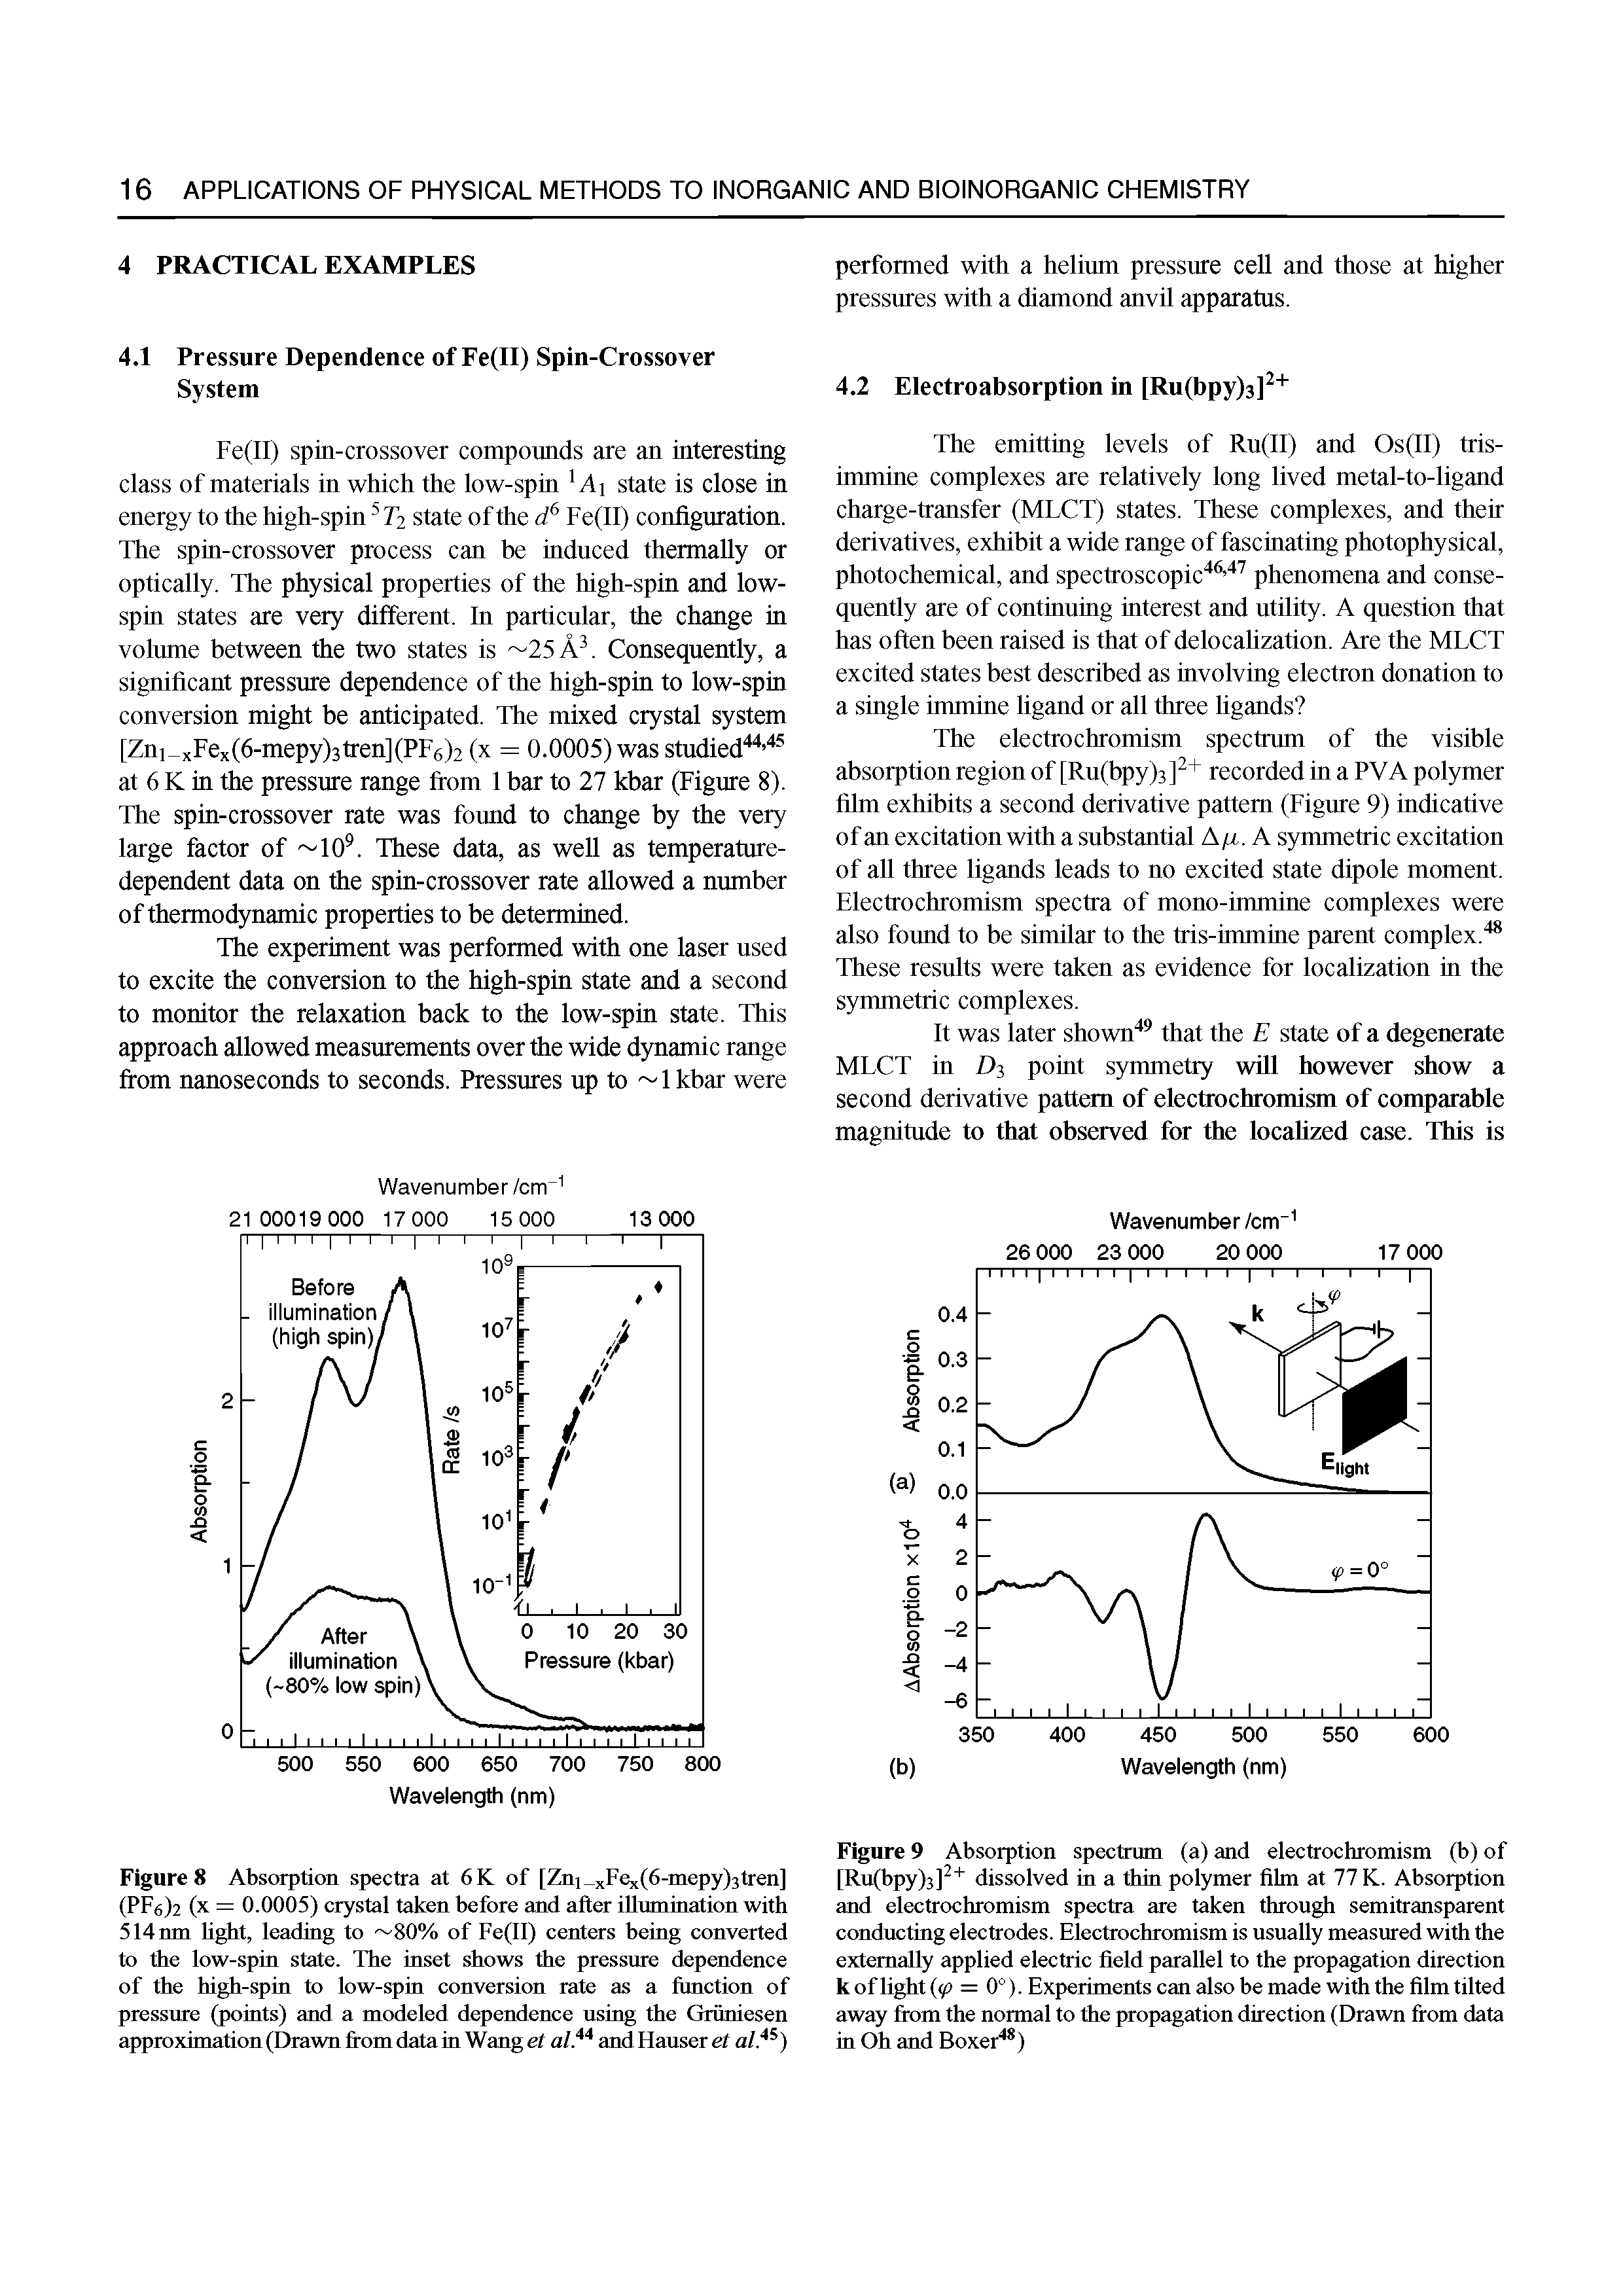 Figure 9 Absorption spectrum (a) and electrochromism (b) of [Ru(bpy)3] dissolved in a thin polymer film at 77 K. Absorption and electrochromism spectra are taken through semitransparent conducting electrodes. Electrochromism is usually measured with the externally applied electric field parallel to the propagation direction koflight( = 0°). Experiments can also be made with the film tilted away from the normal to the propagation direction (Drawn from data in Oh and Boxer )...